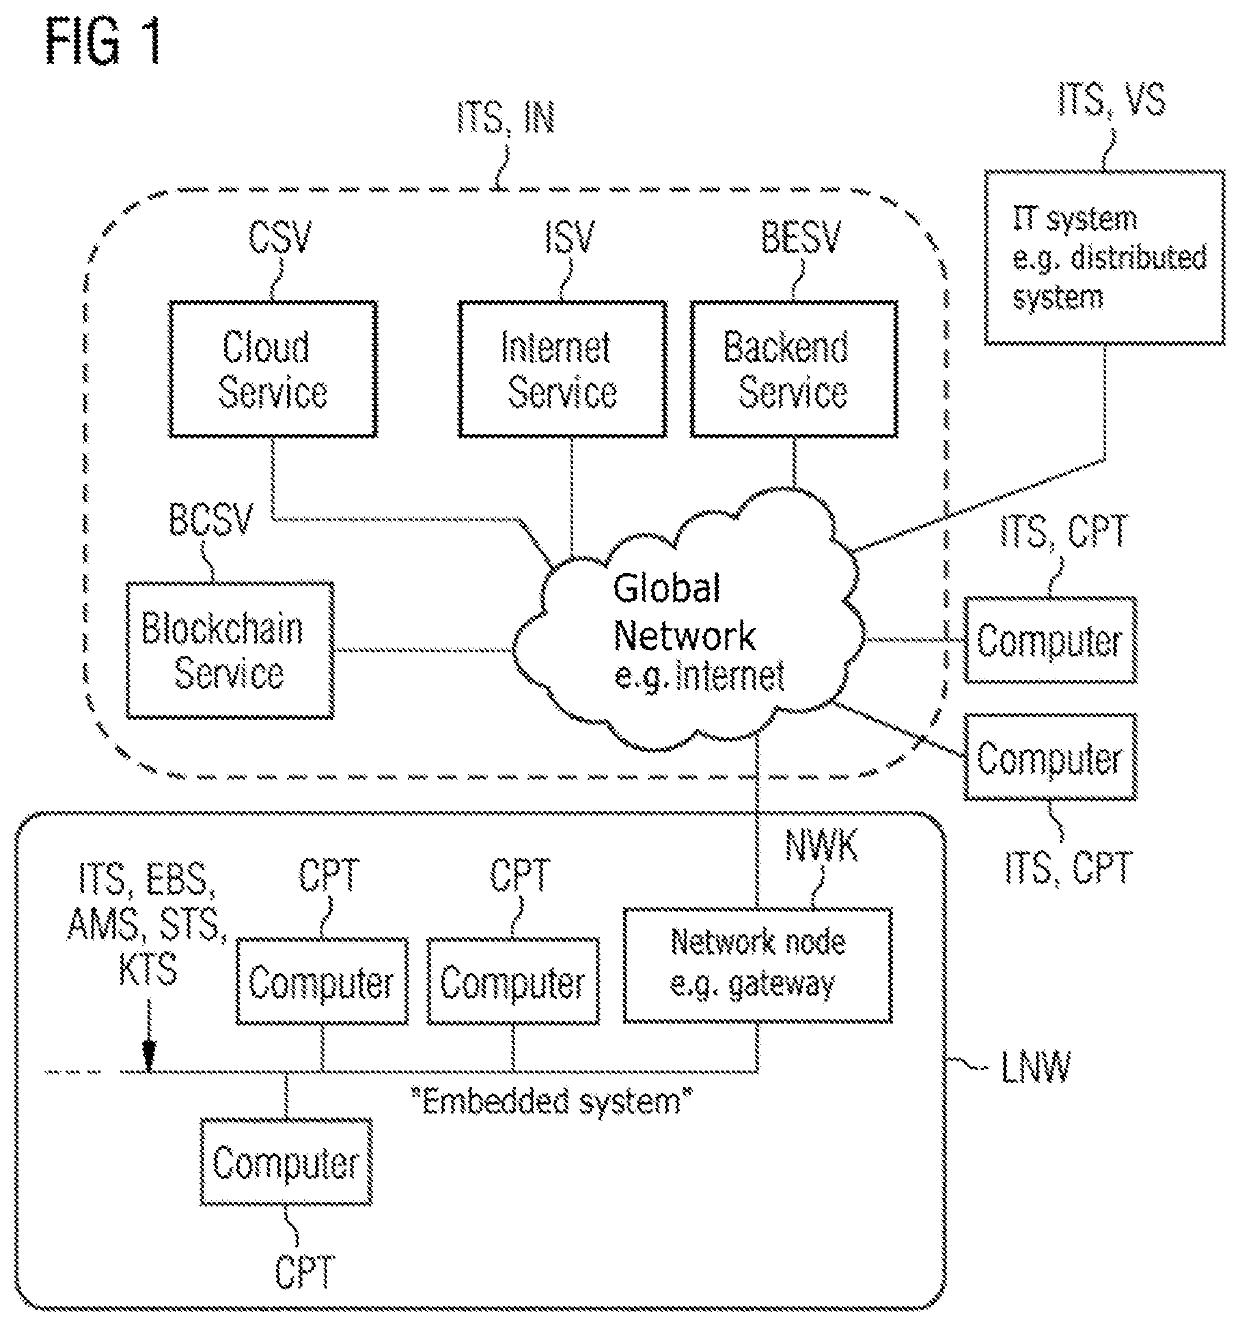 Method and computer for cryptographically protecting control communication in and/or service access to it systems, in particular in connection with the diagnosis and configuration in an automation, control or supervisory system